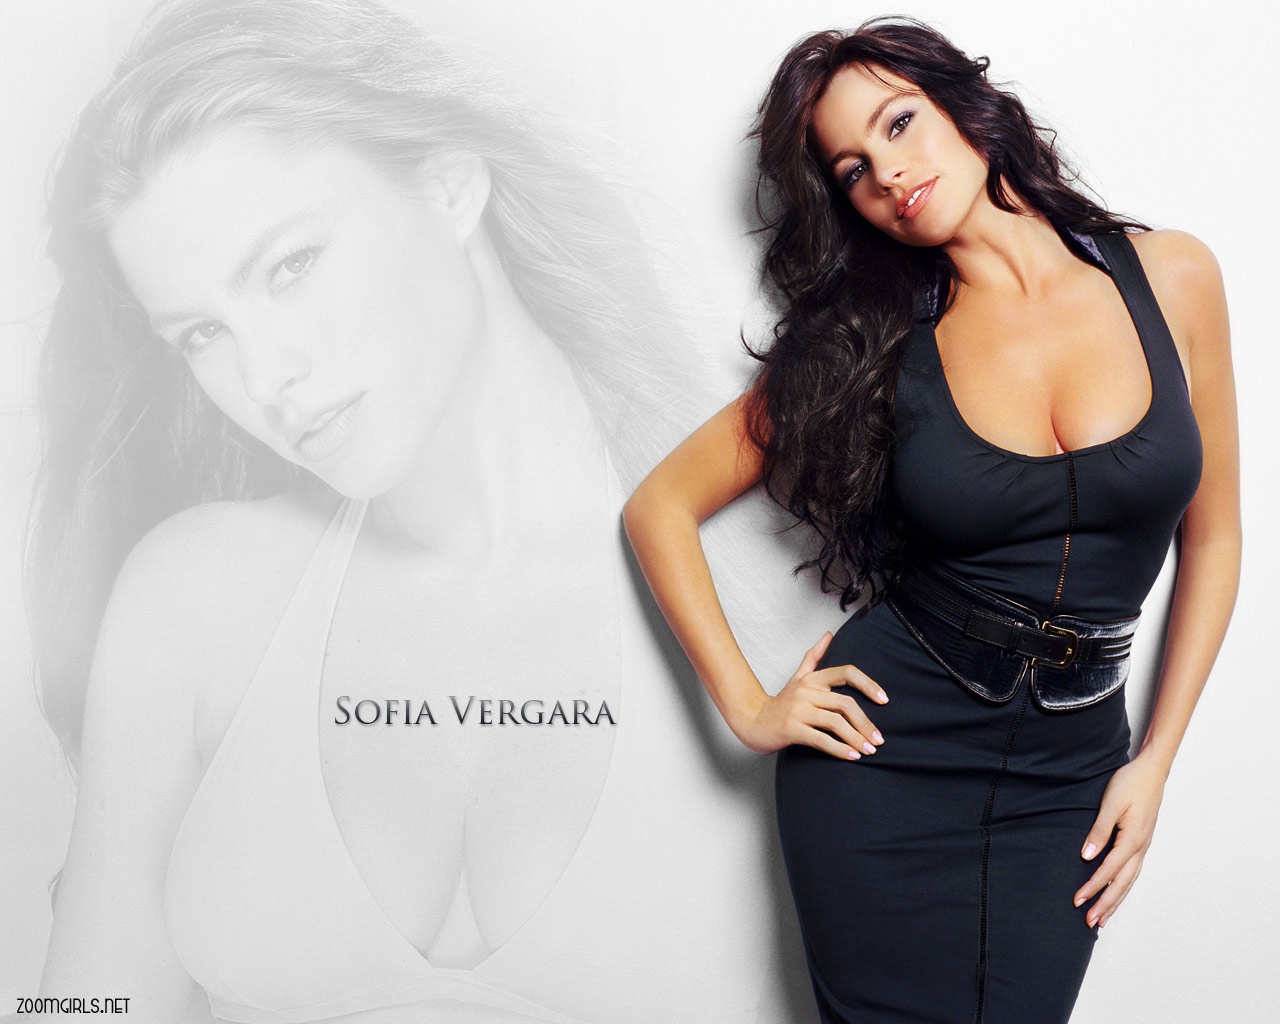 1280px x 1024px - Free download Sofia Vergara 1280x1024 nude sexy hd and wide wallpapers  [1280x1024] for your Desktop, Mobile & Tablet | Explore 73+ Sofia Vergara  Wallpaper | Sofia Vergara Hd Wallpaper, Sofia Vergara Wallpaper